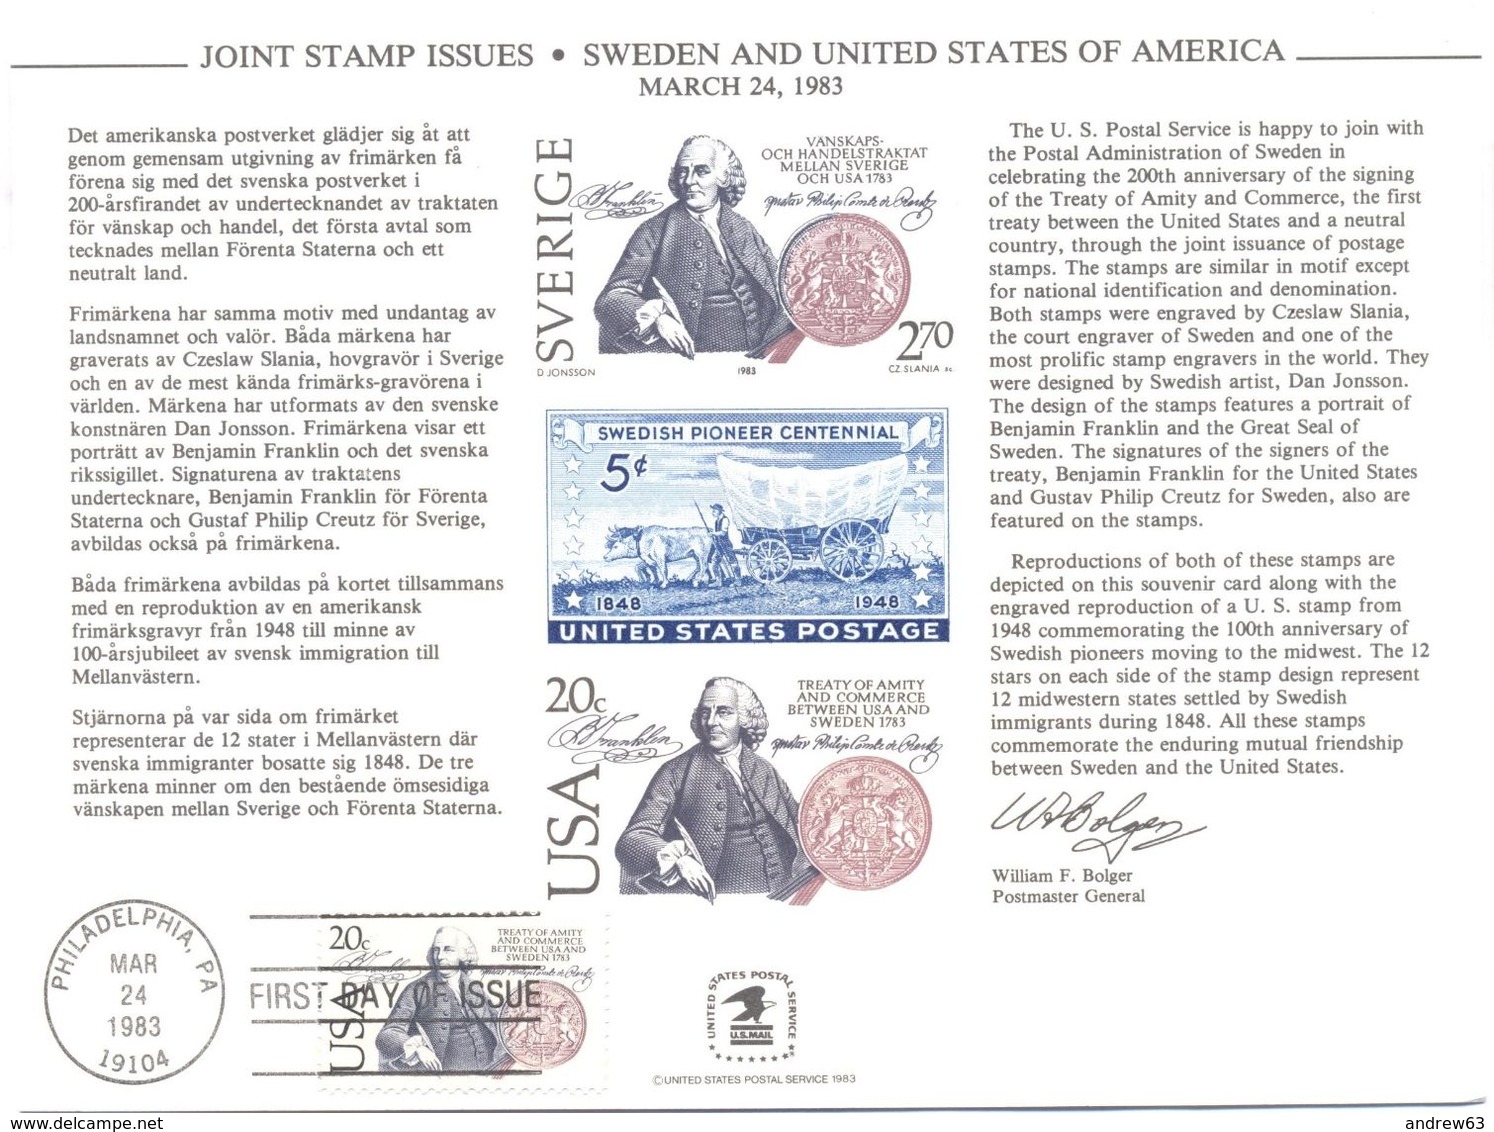 STATI UNITI - USA - 1983 - Cancelled Mint Souvenir Card - Joint Stamp Issues - USA-SWEDEN 200th Ann. Of Treaty - FDC - Souvenirs & Special Cards